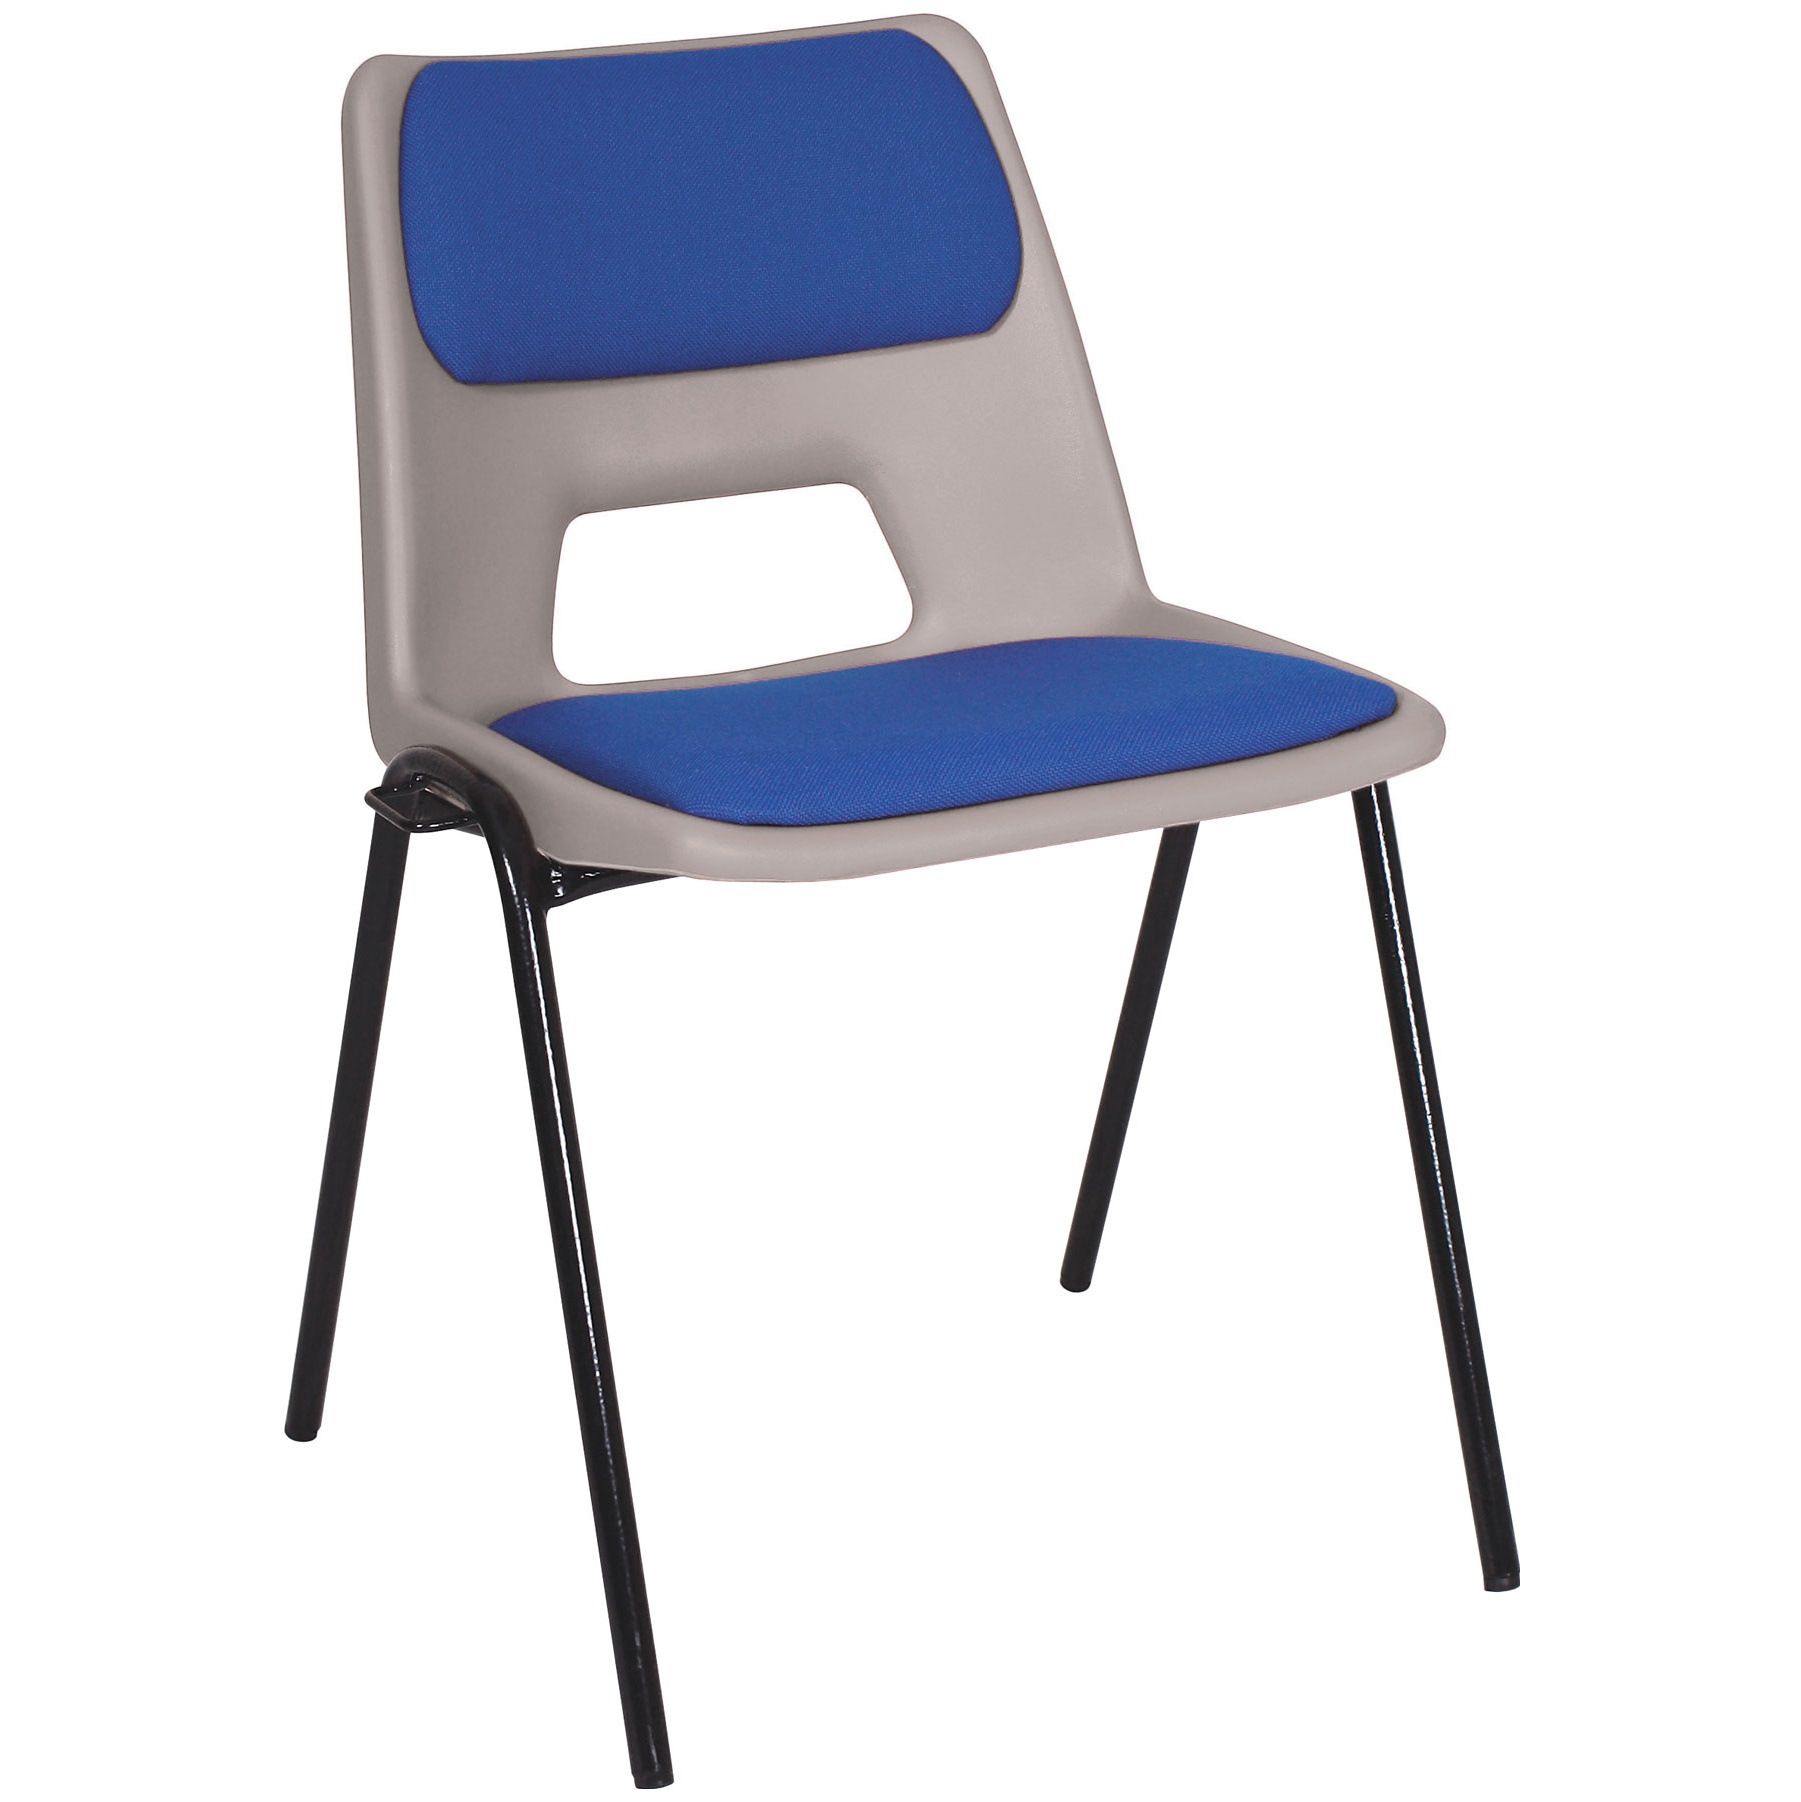 Scholar Padded Polypropylene Chairs | Classroom Chairs